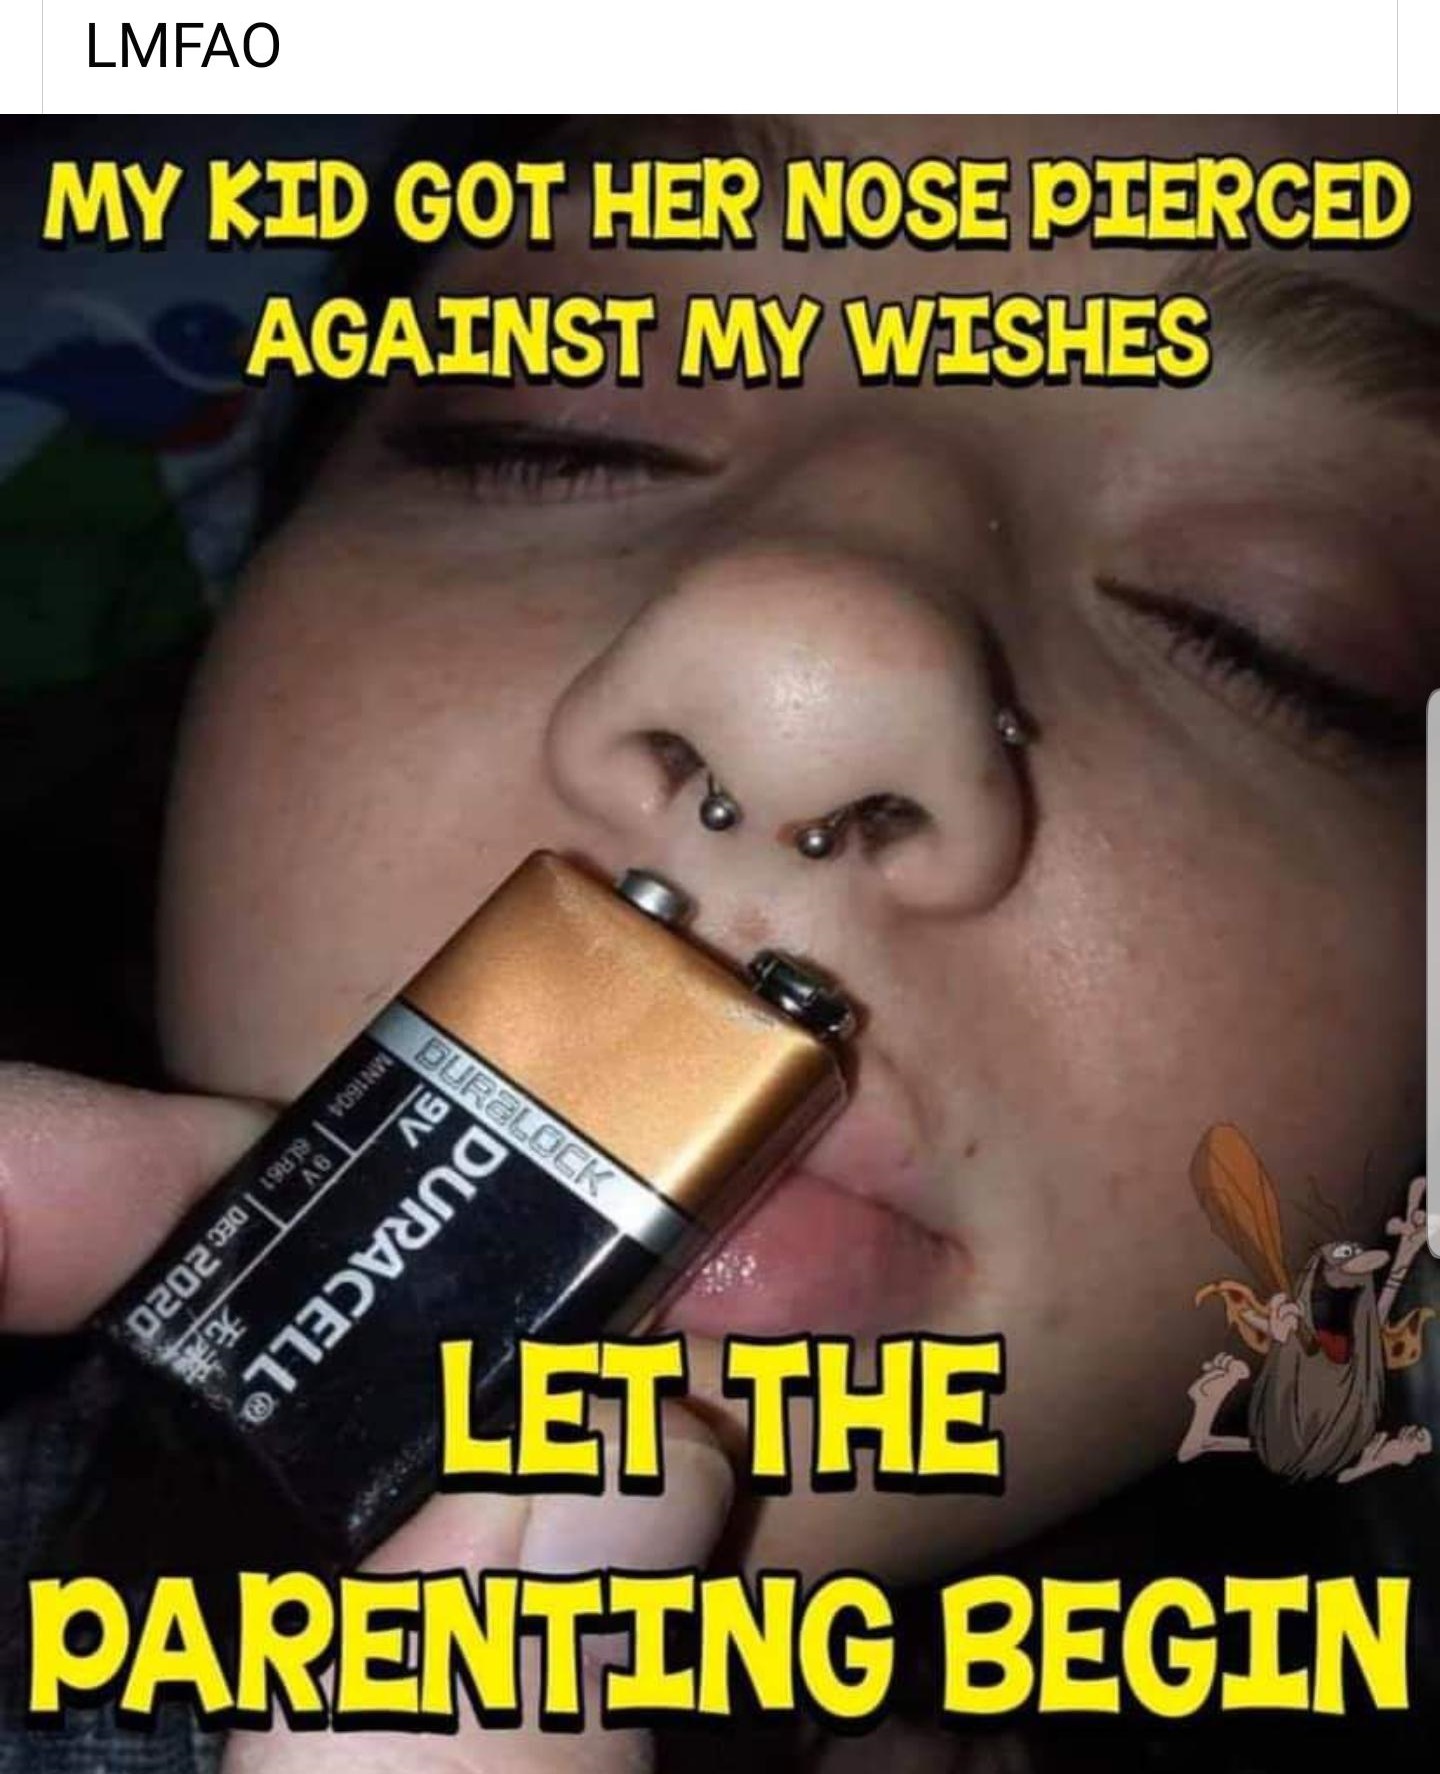 lip - Lmfao My Kid Got Her Nose Pierced Against My Wishes Durilock 2020 Duracell Let The Parenting Begin